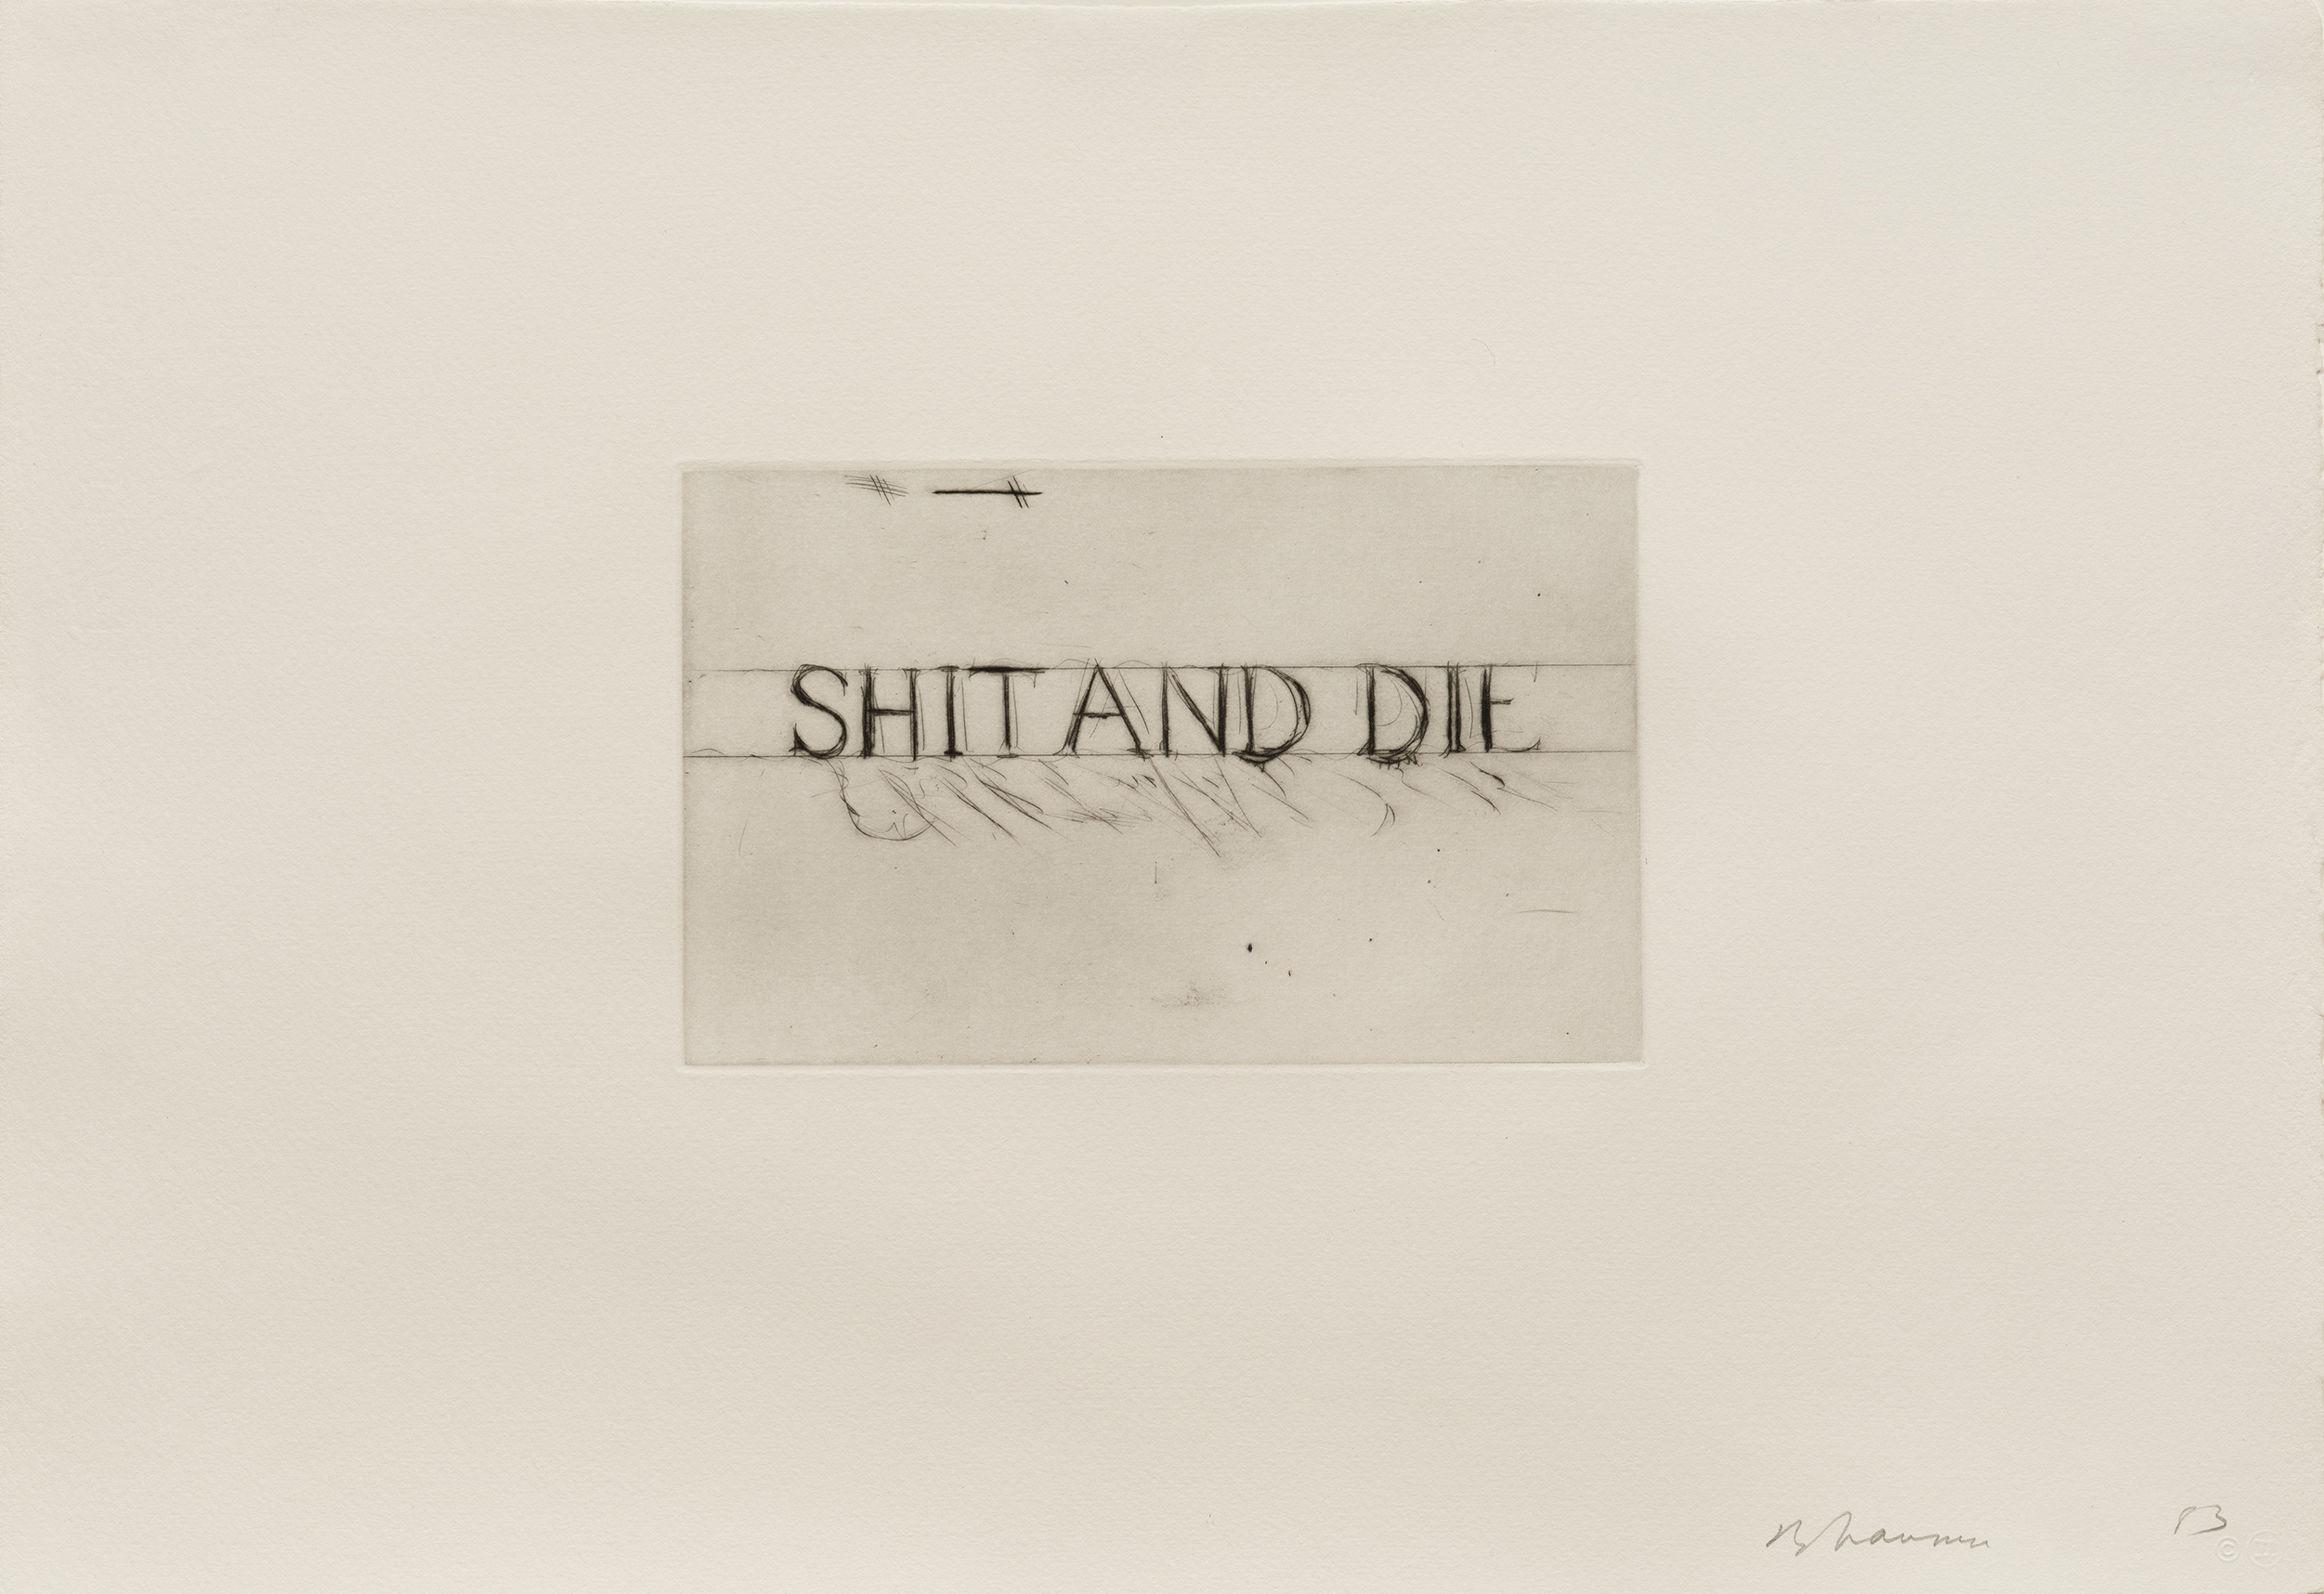 Shit and Die by Bruce Nauman